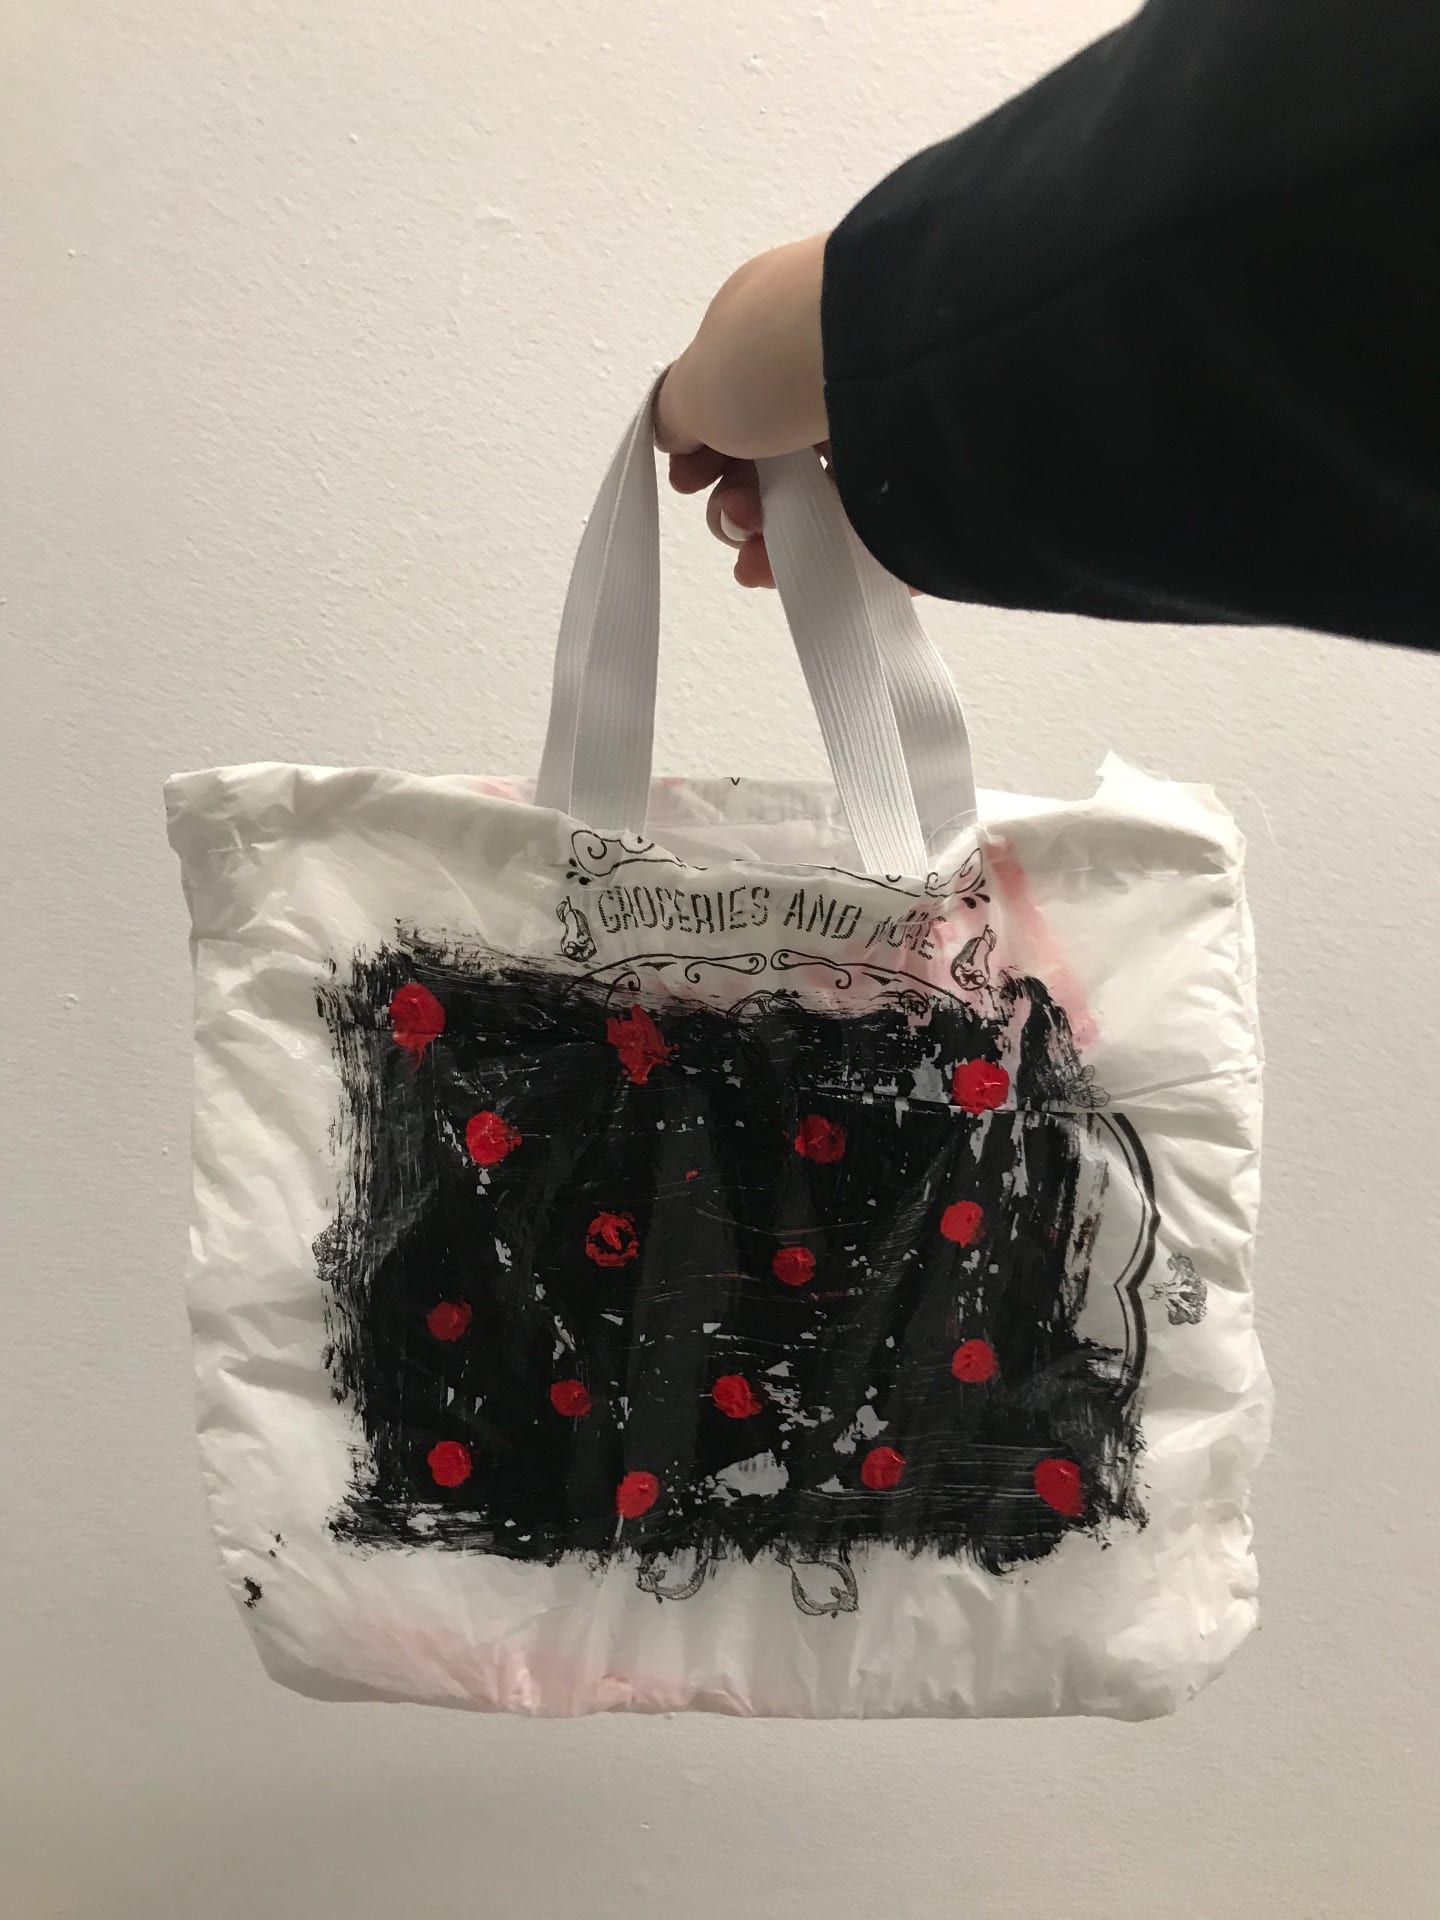 Materials Ecology Redesign: Upcycled Plastic Bag